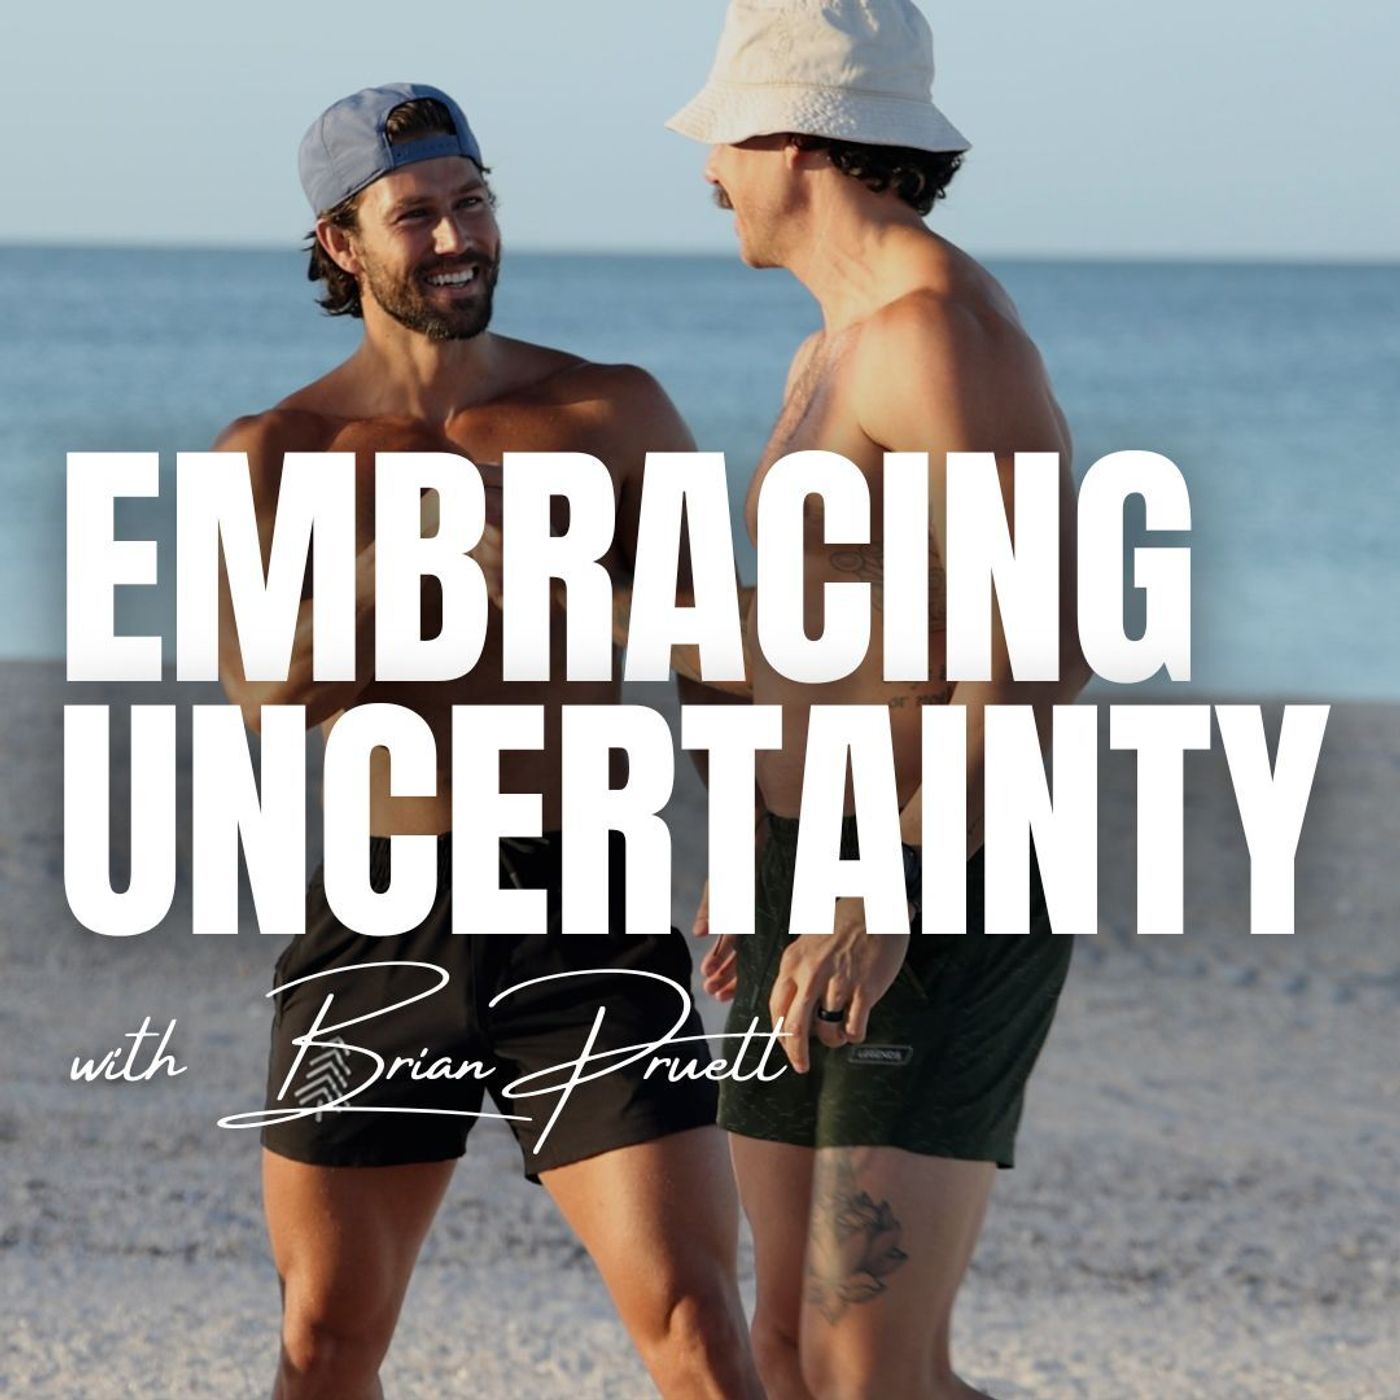 45: Learning to Embrace the Unknown (with Ryan Tuttle)